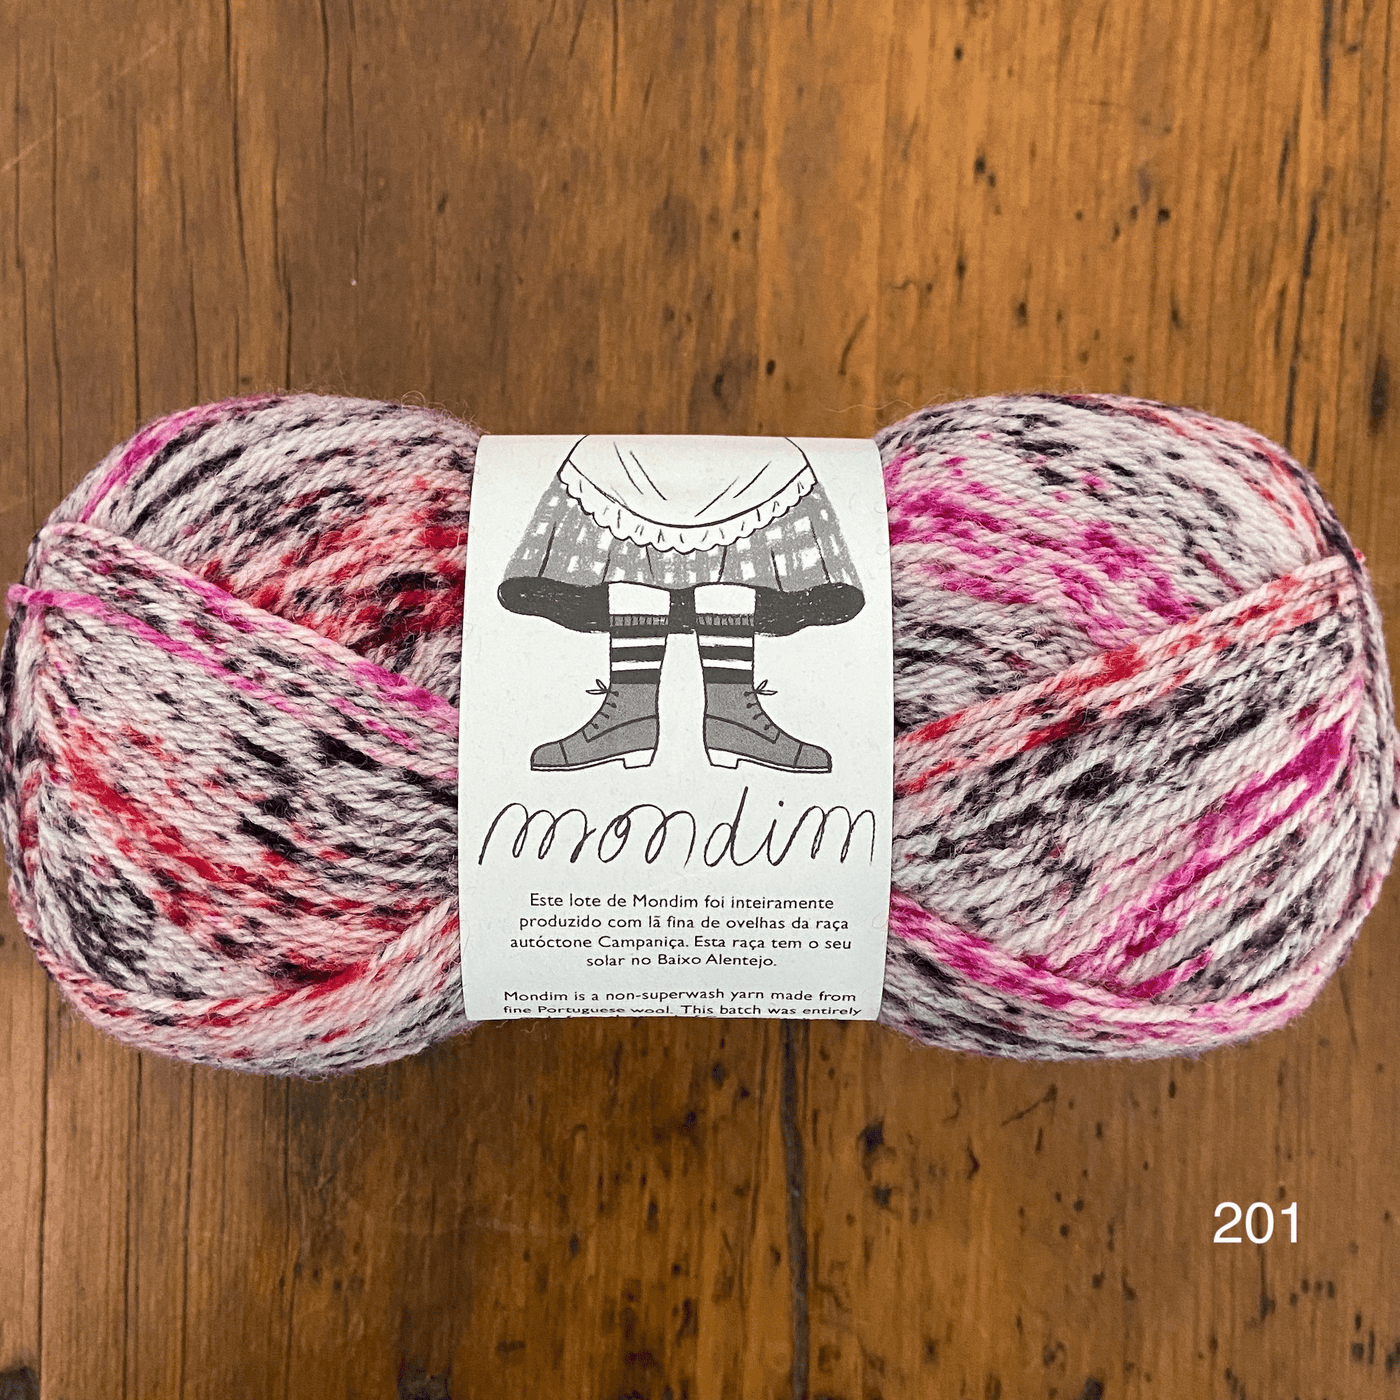 Medley™ Variegated Embroidery Thread - Flamingo 1000 Meter